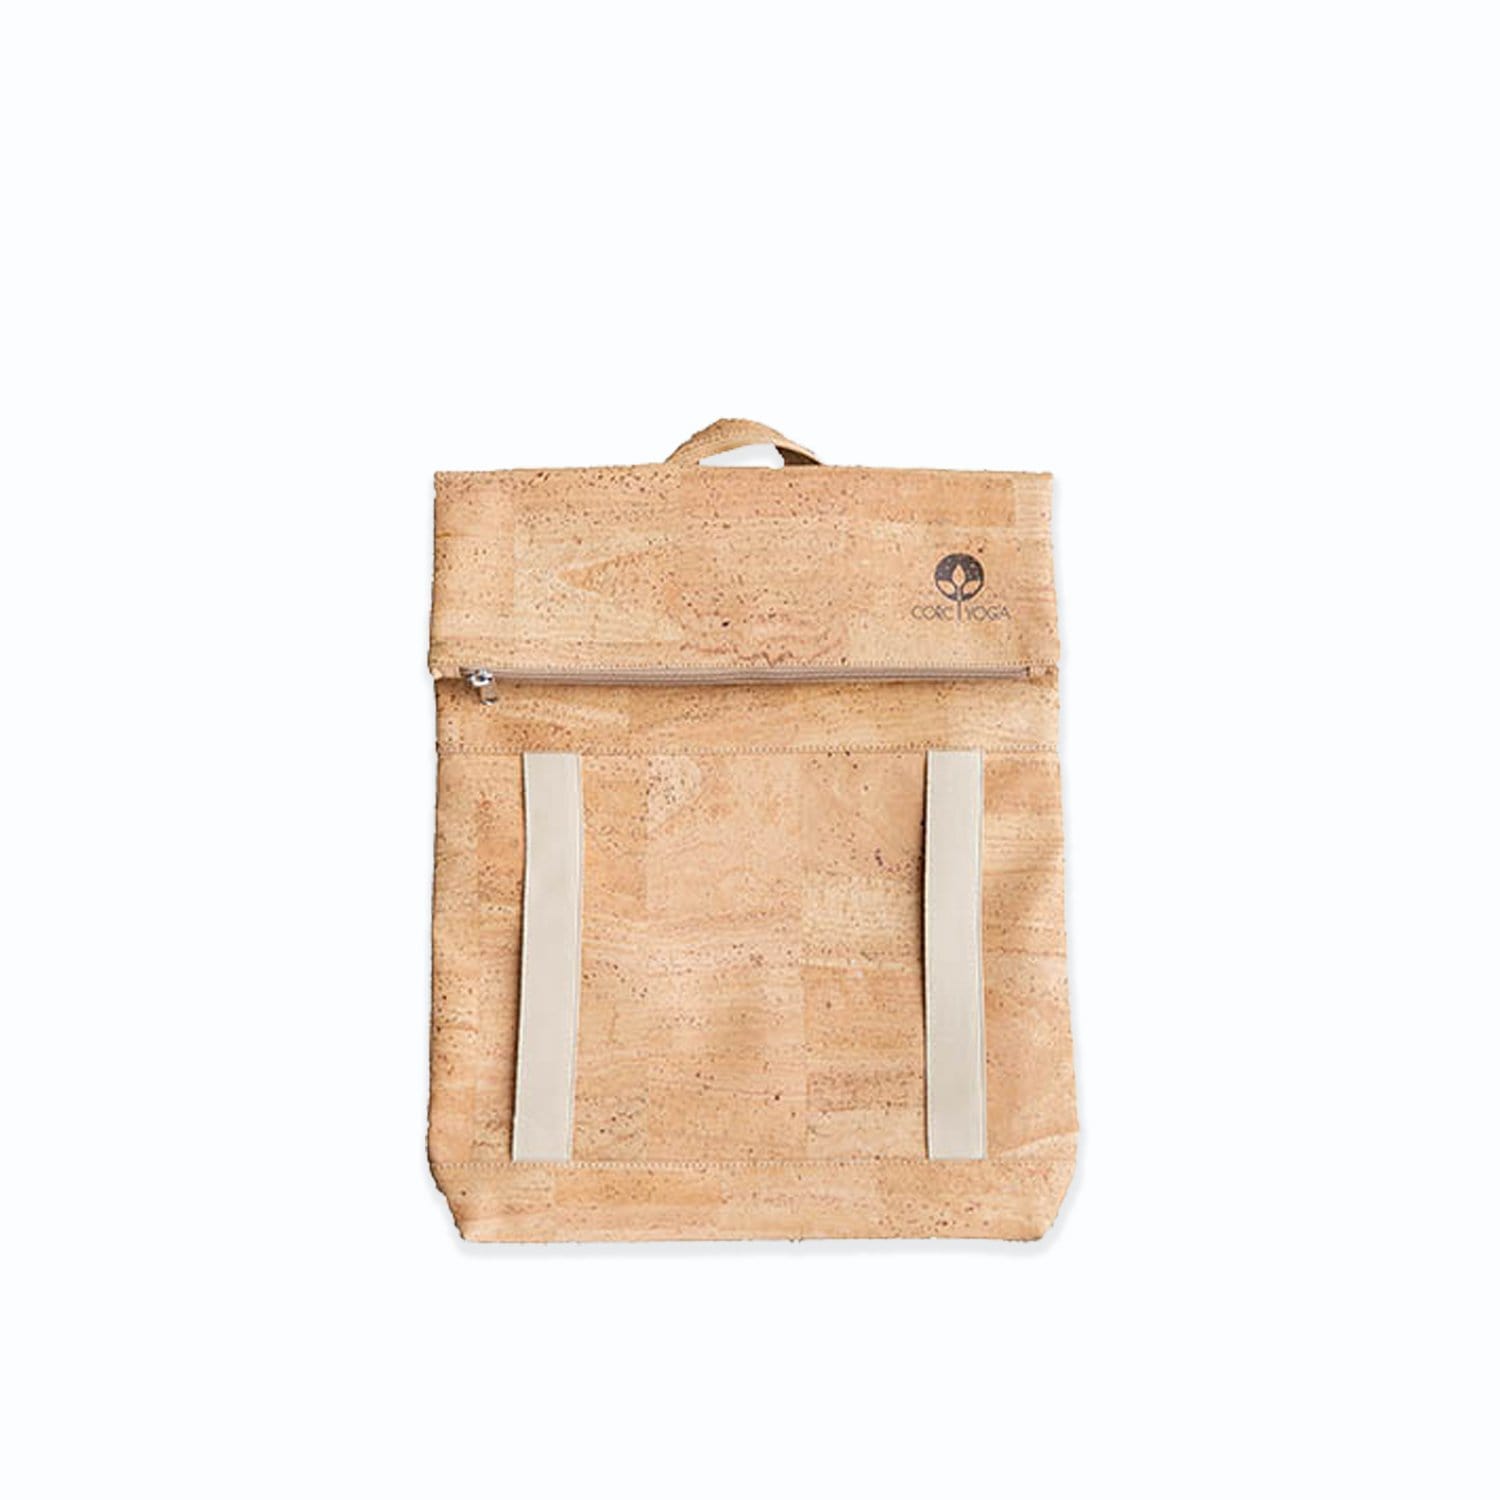 This yoga backpack is a great gift idea for yoga teachers. 